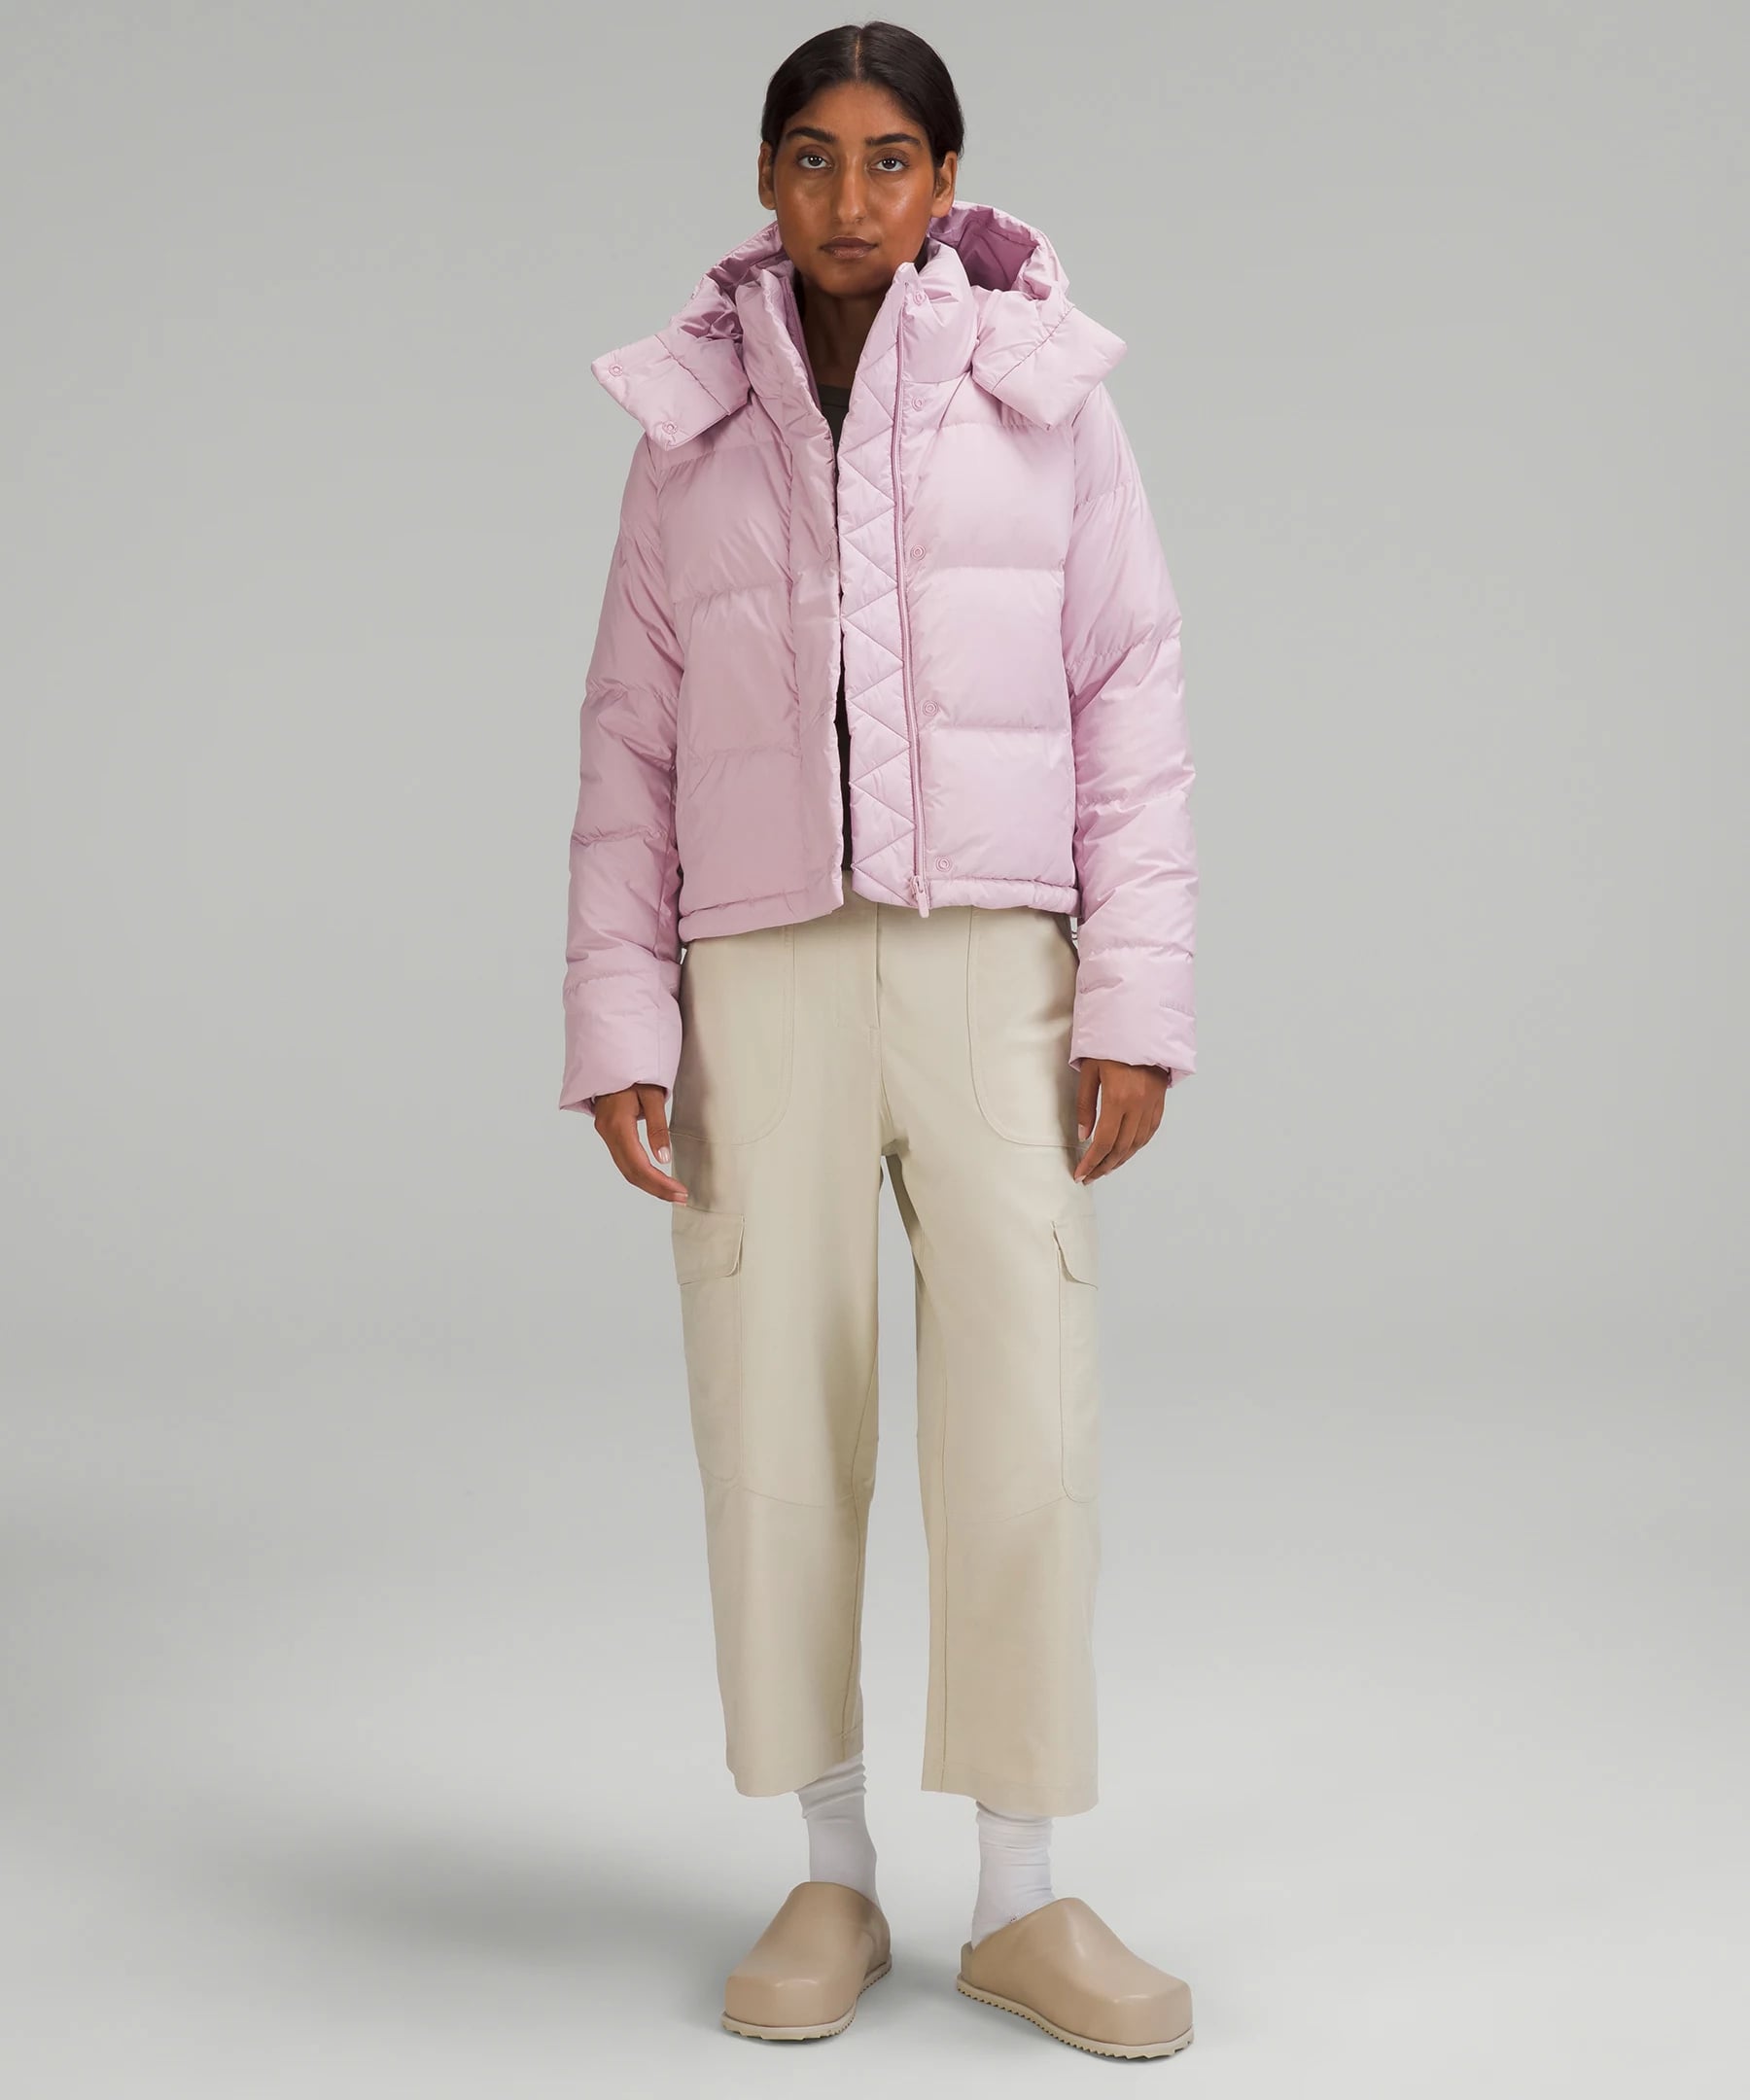 Found a dupe for the Lululemon Wunder Puff jacket from